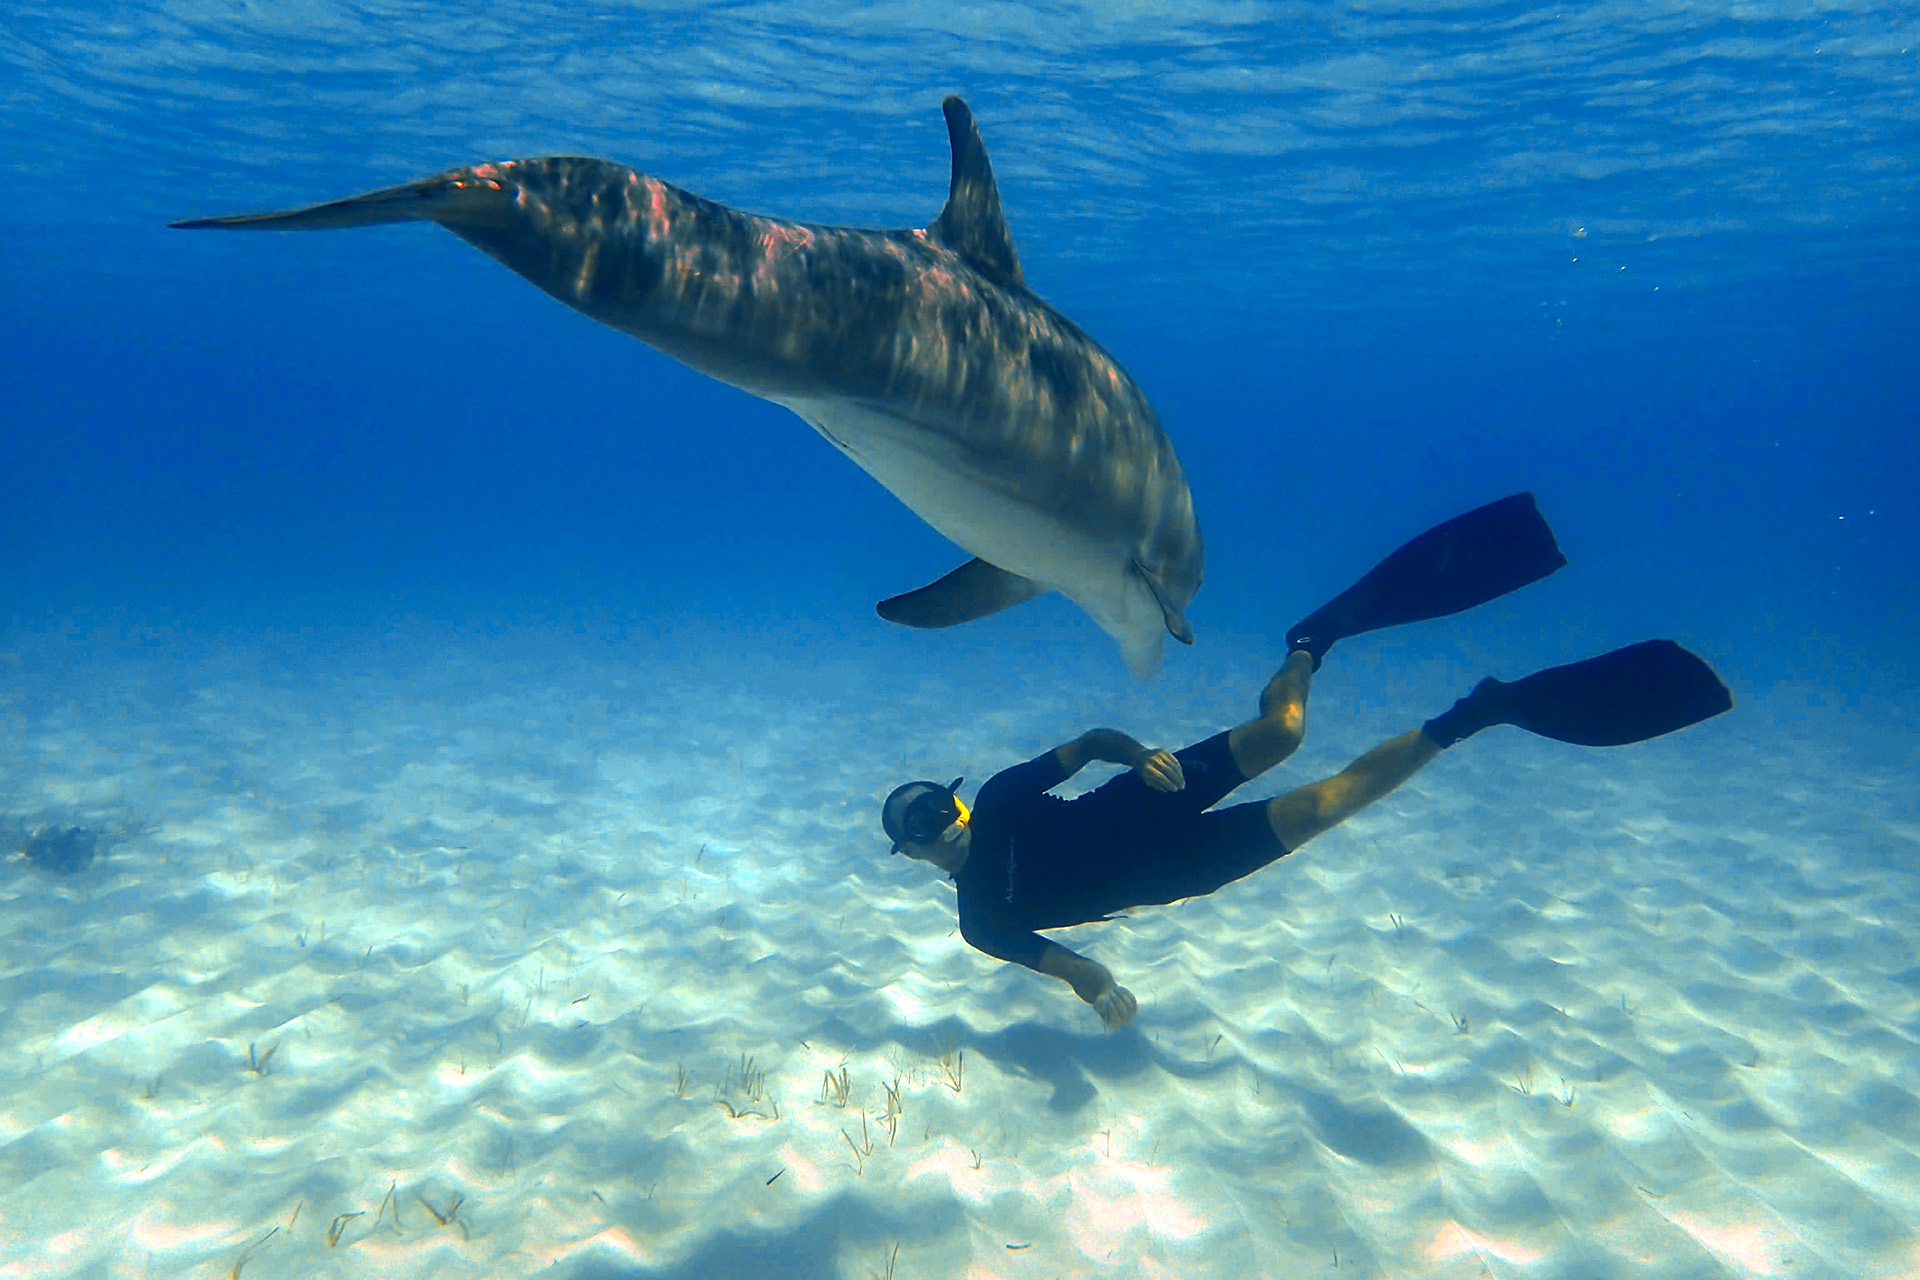 Swimming with Dolphins in the Bahamas Bonnie Lynn